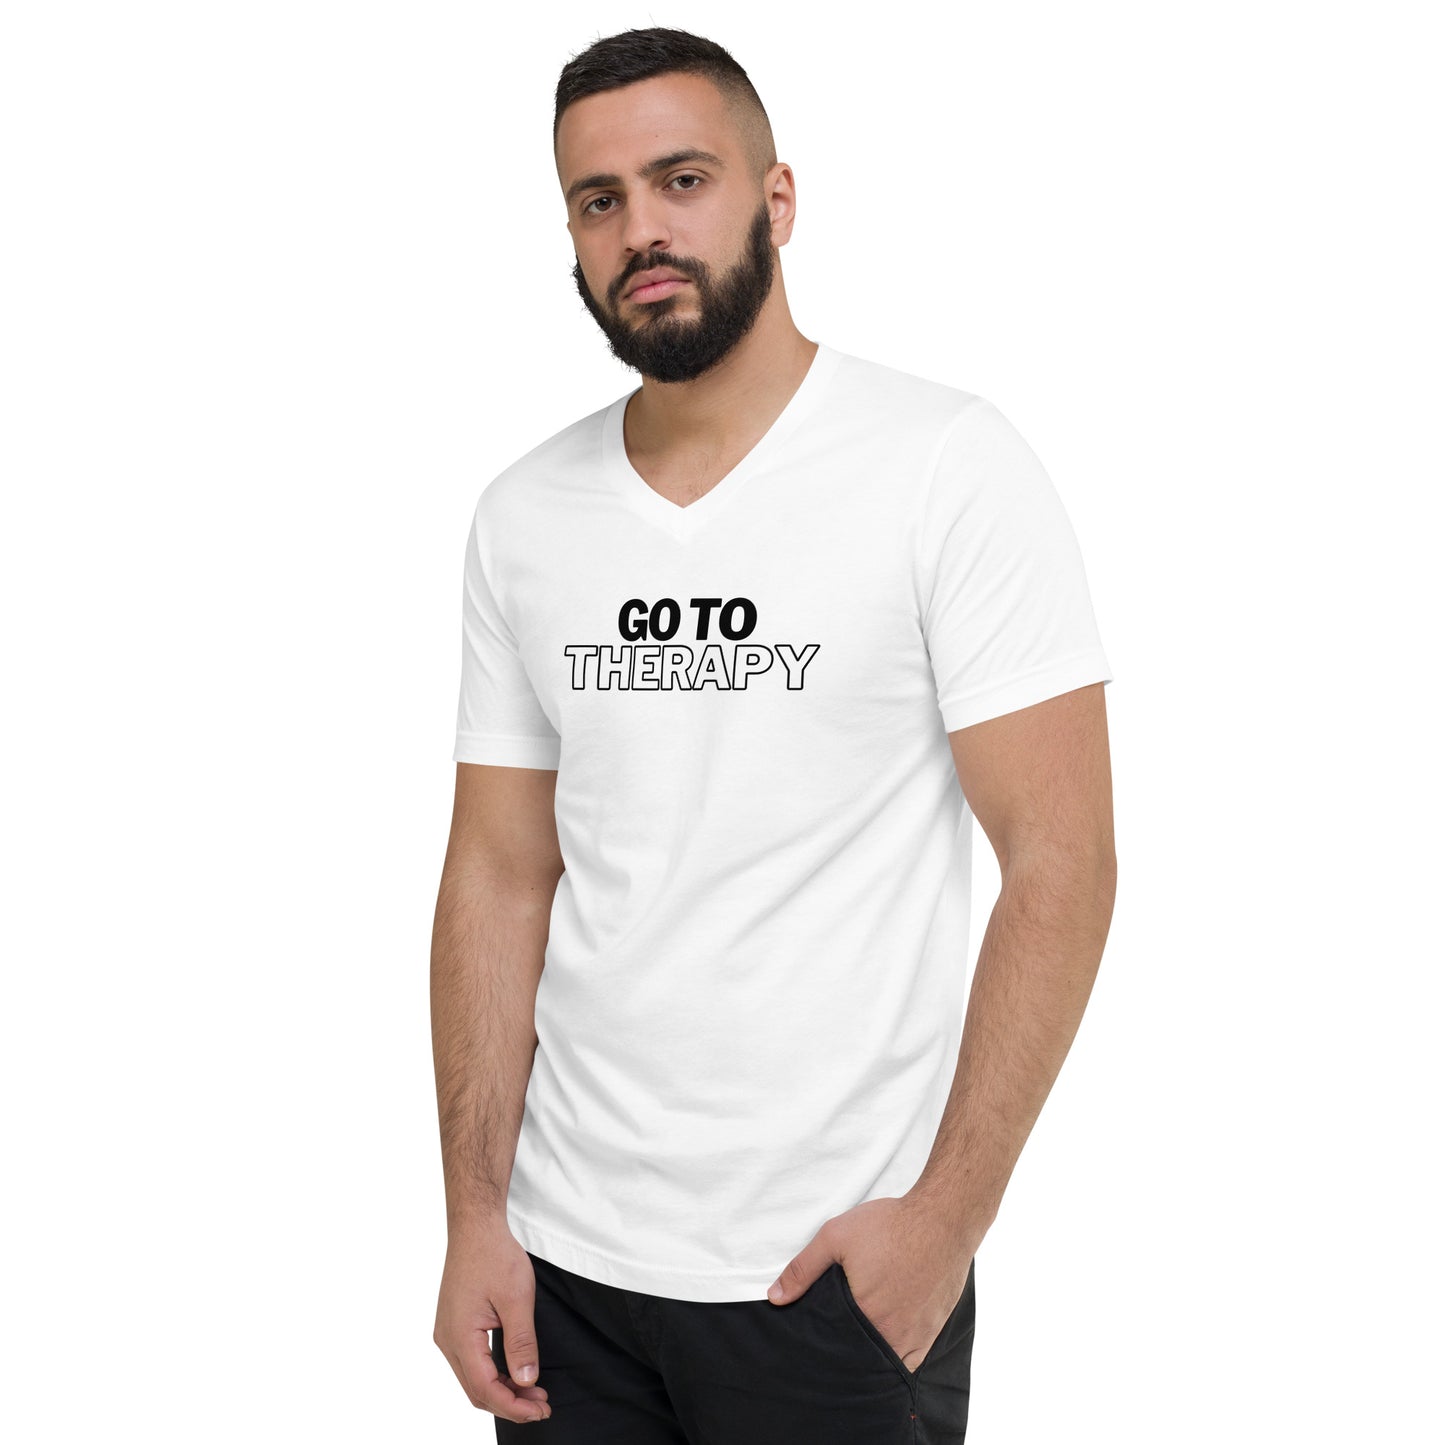 GO TO THERAPY - Short Sleeve V-Neck T-Shirt